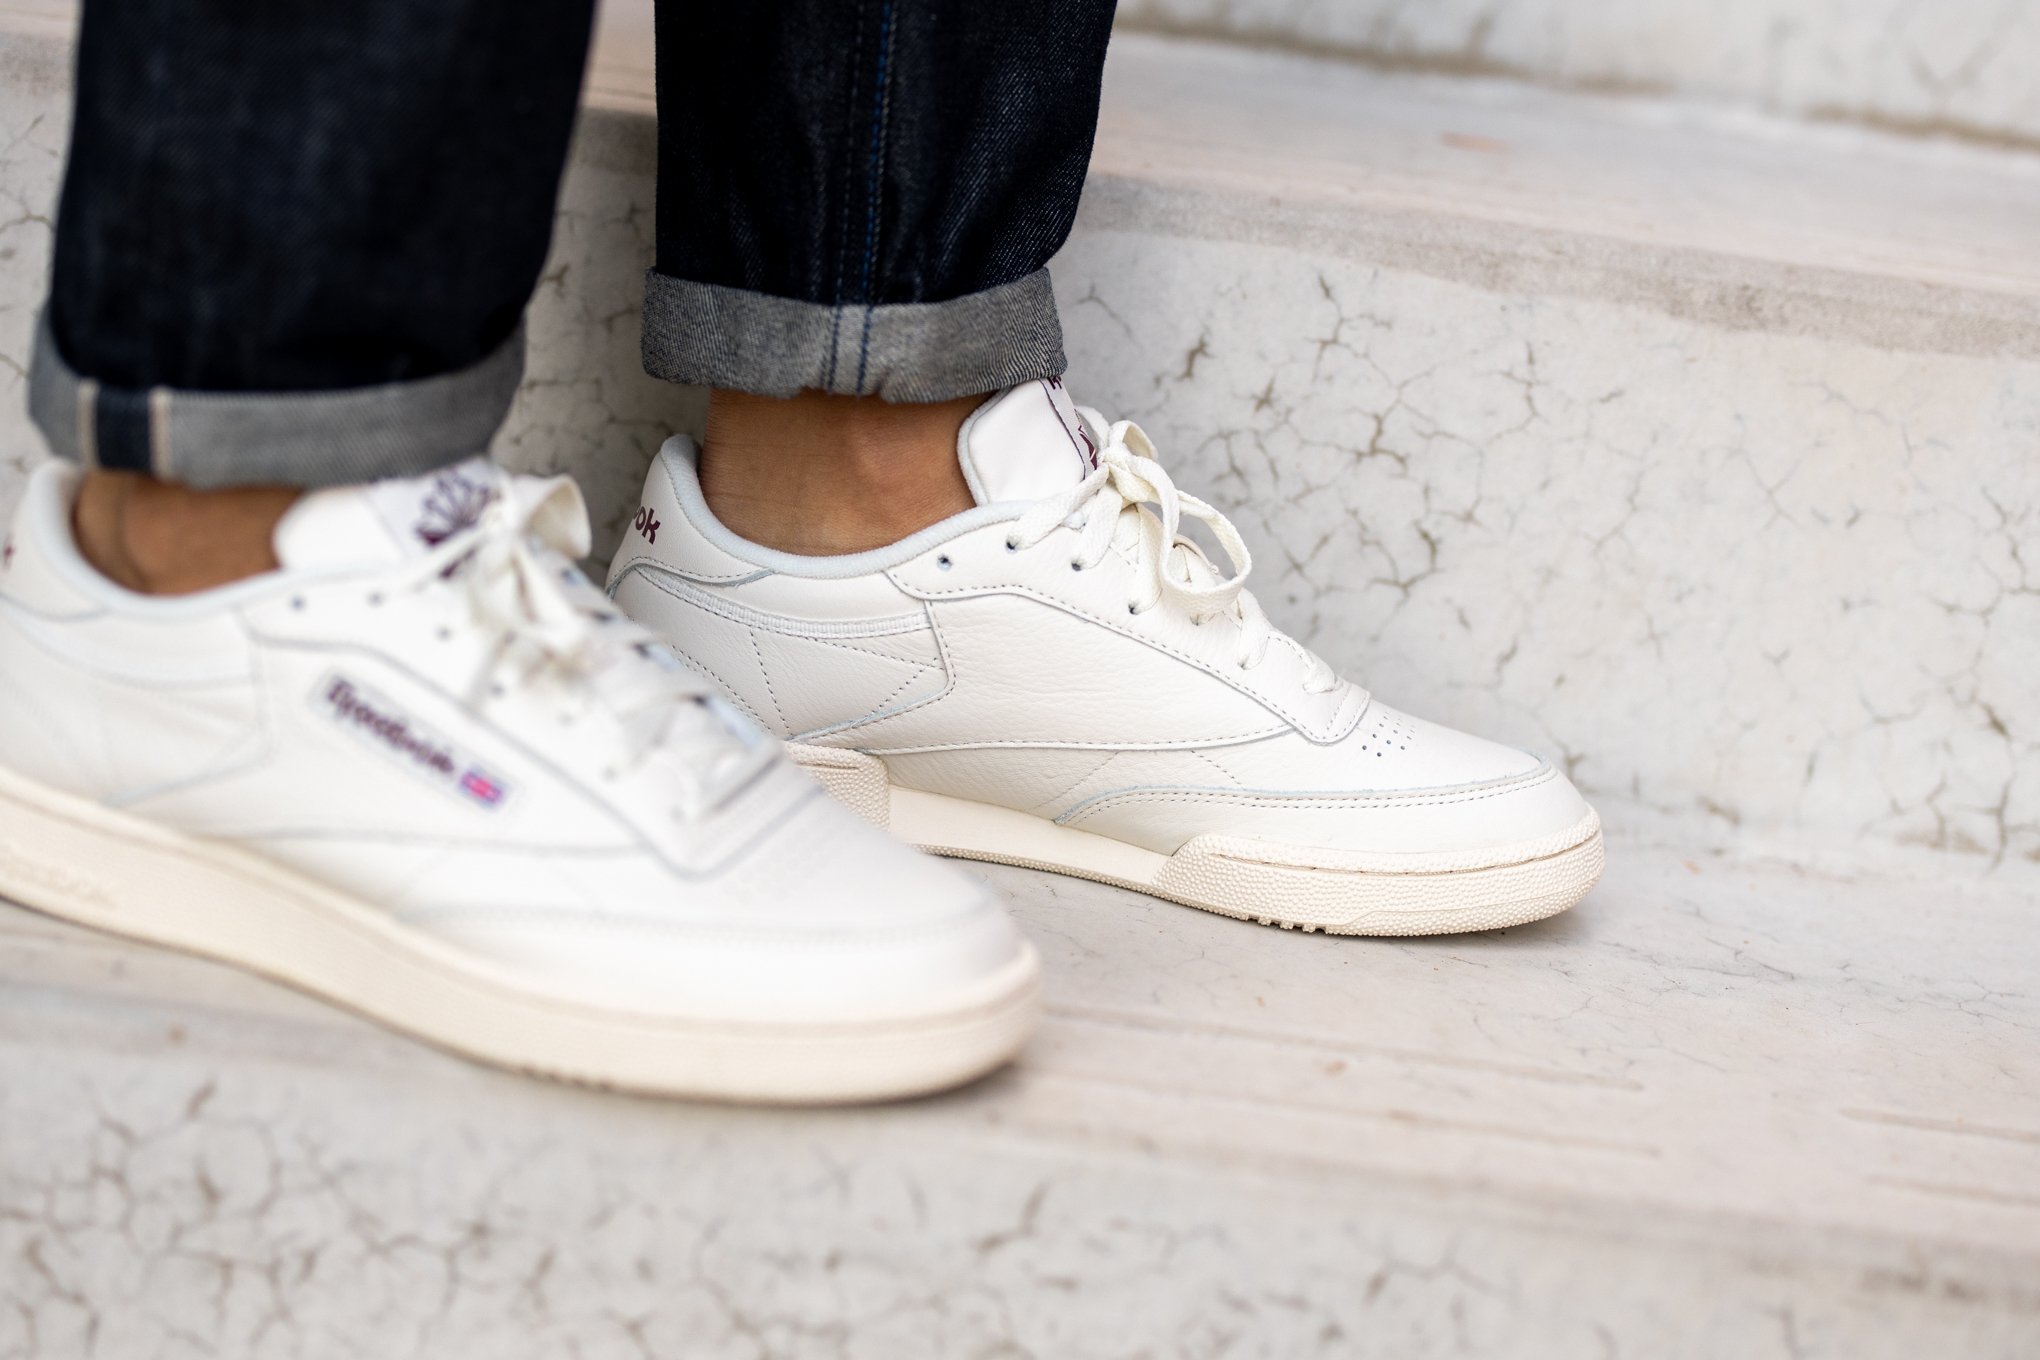 Are Reebok Club C 85 Good for Wide Feet?